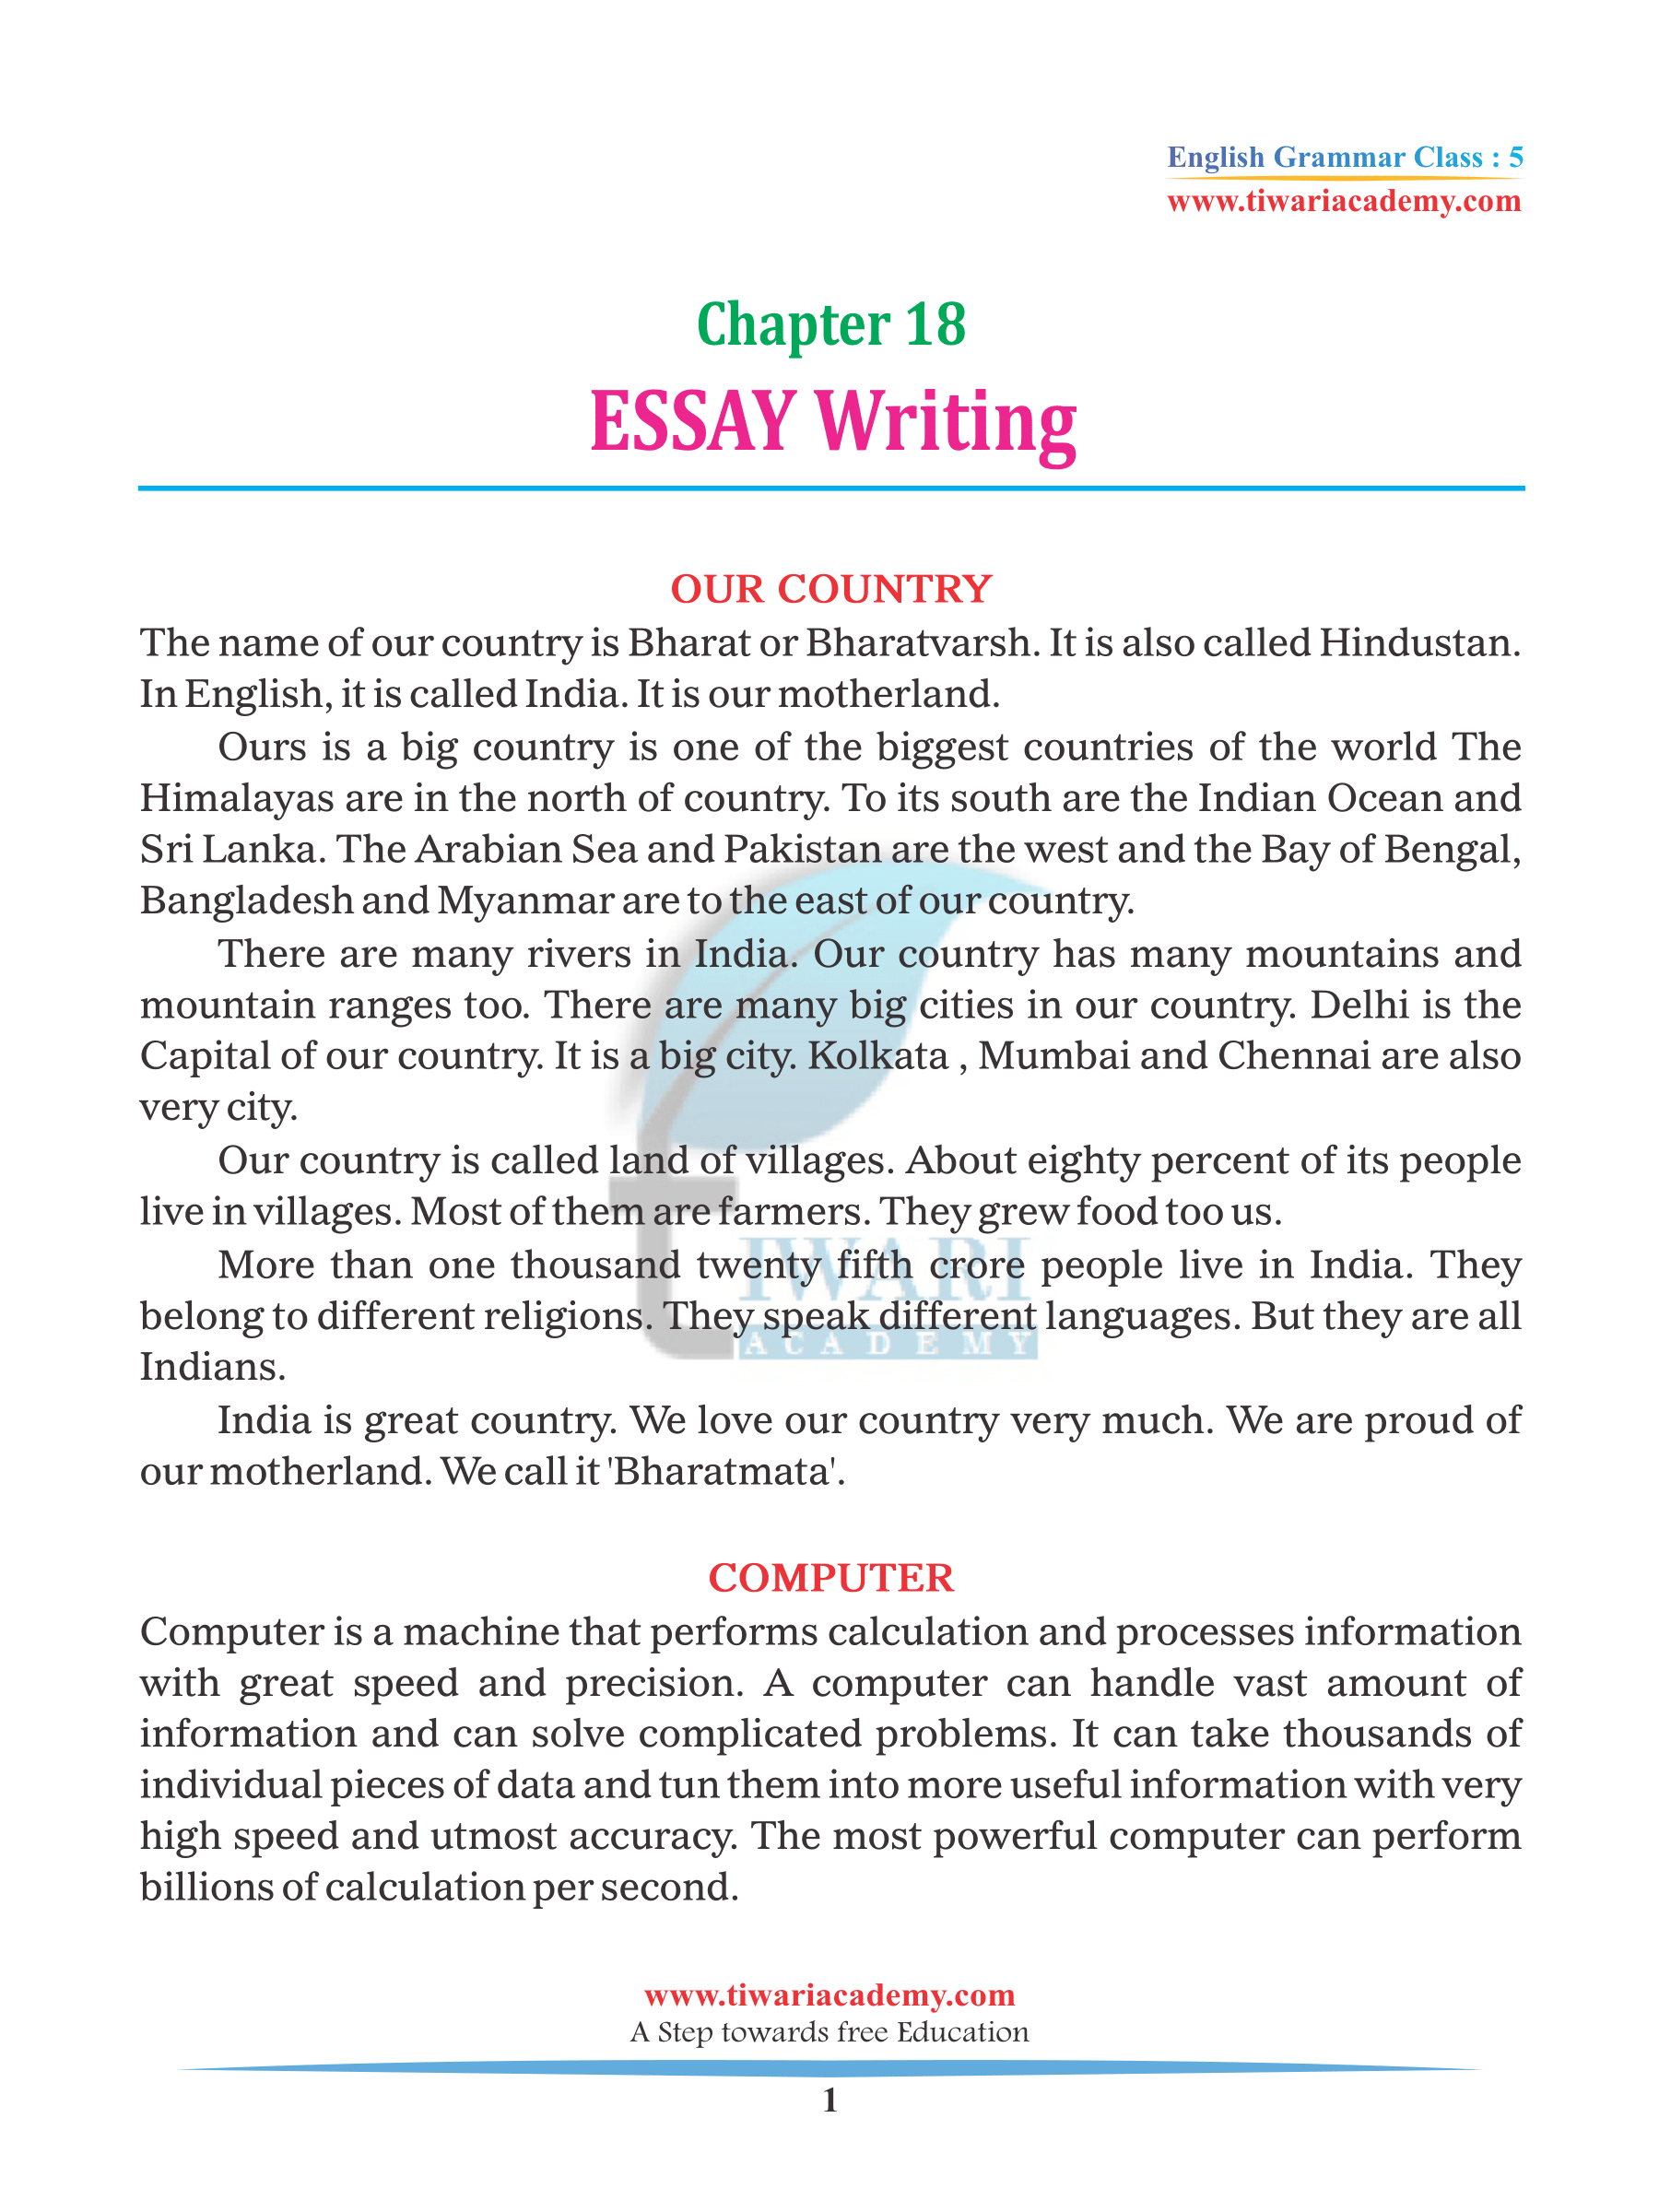 english essay writing for class 5